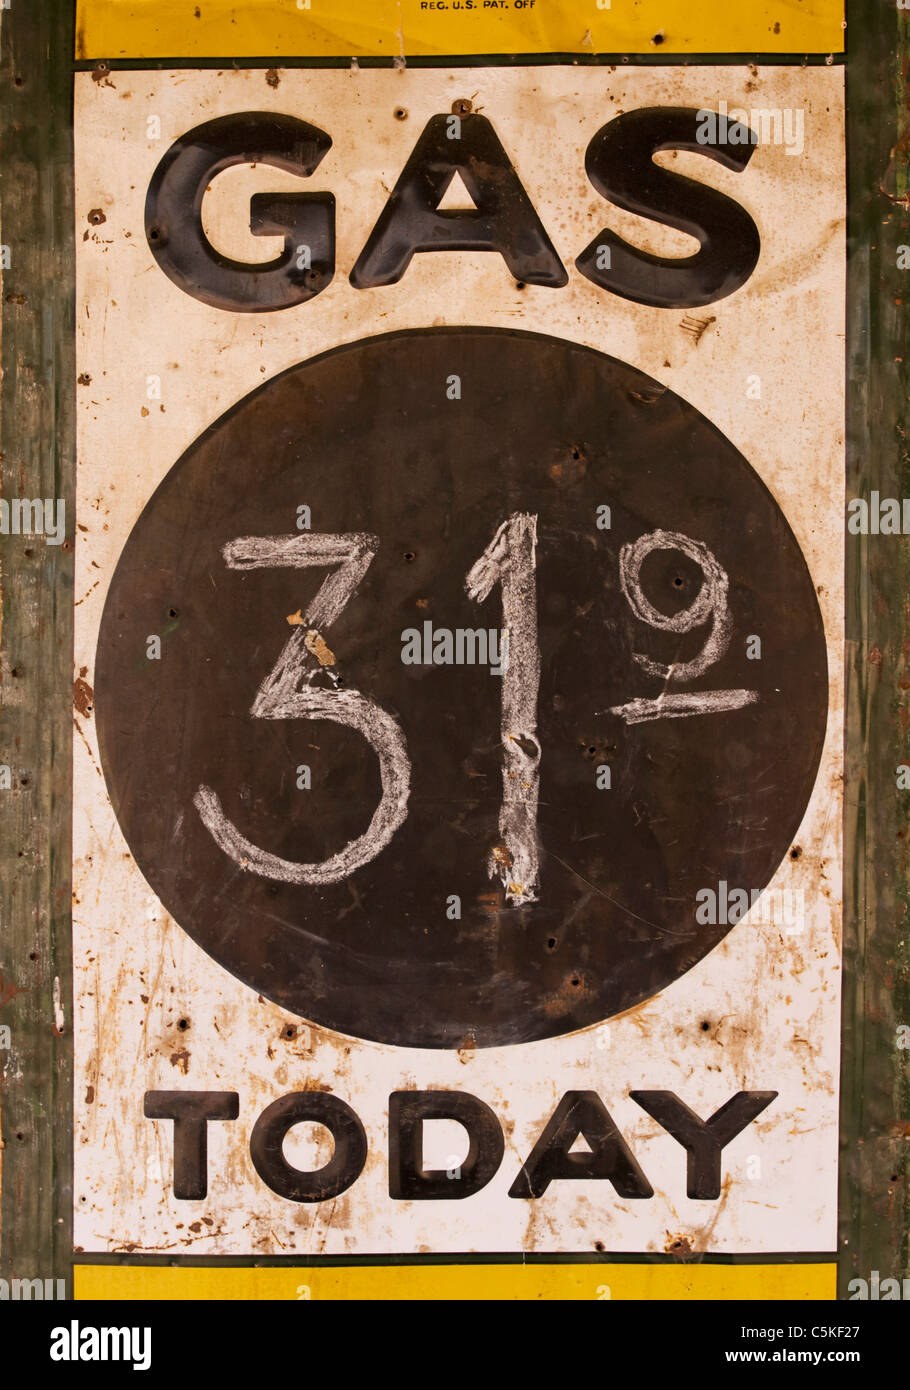 Old gas price signs Stock Photo